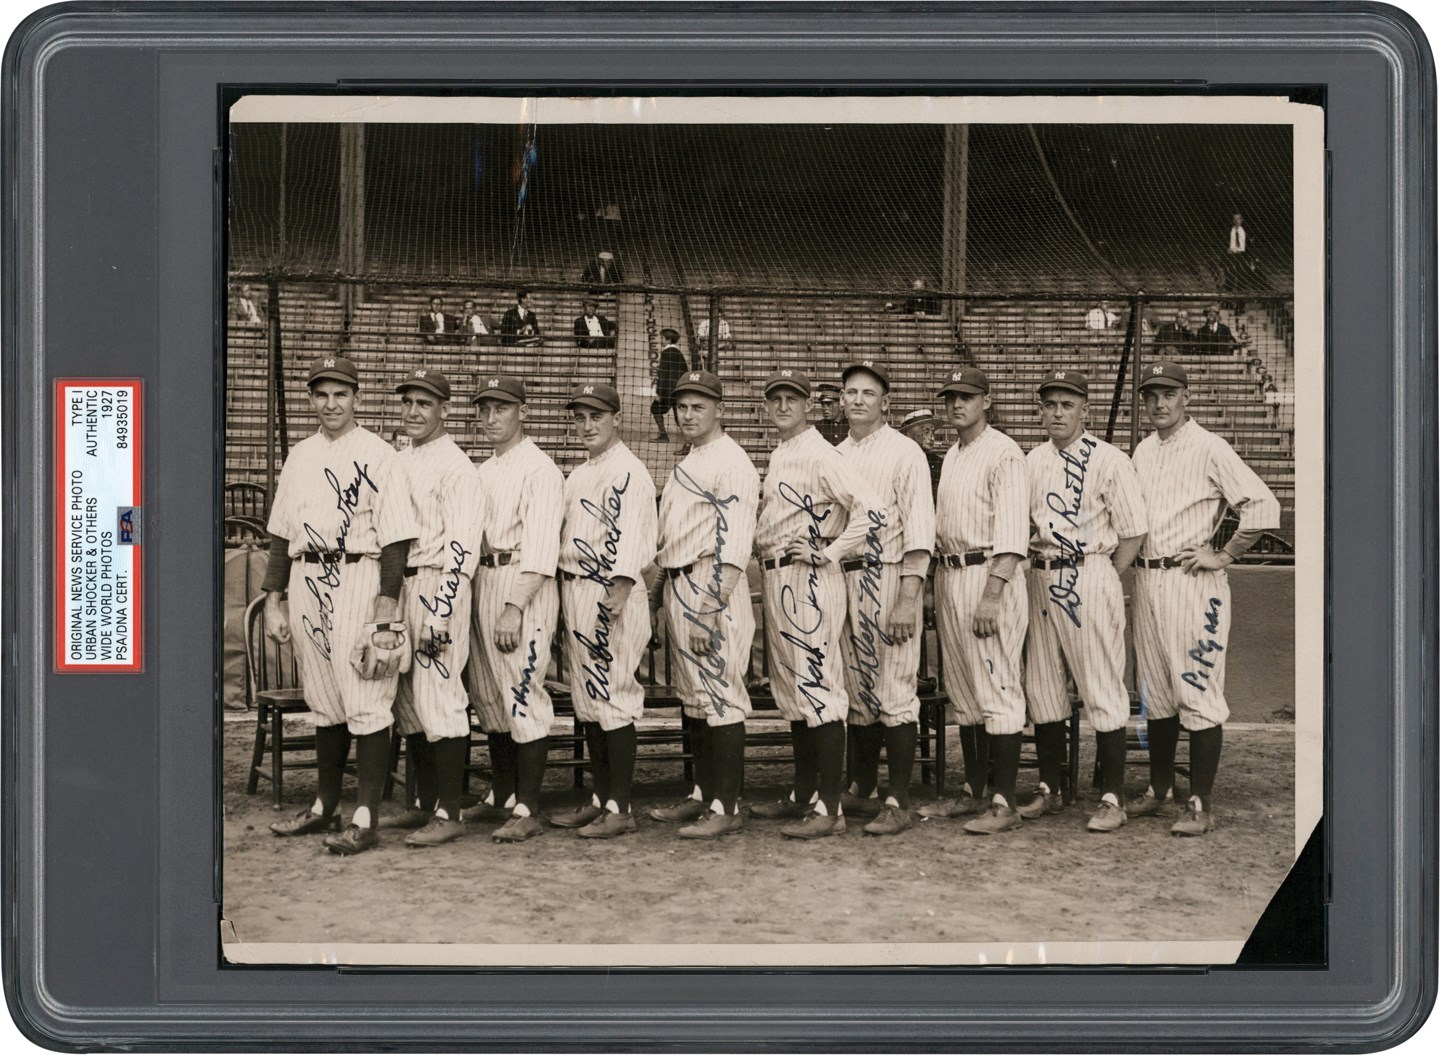 - 1927 New York Yankees Pitching Staff Signed Photograph with Shocker and Giard (PSA Type I with Authentic Signatures)